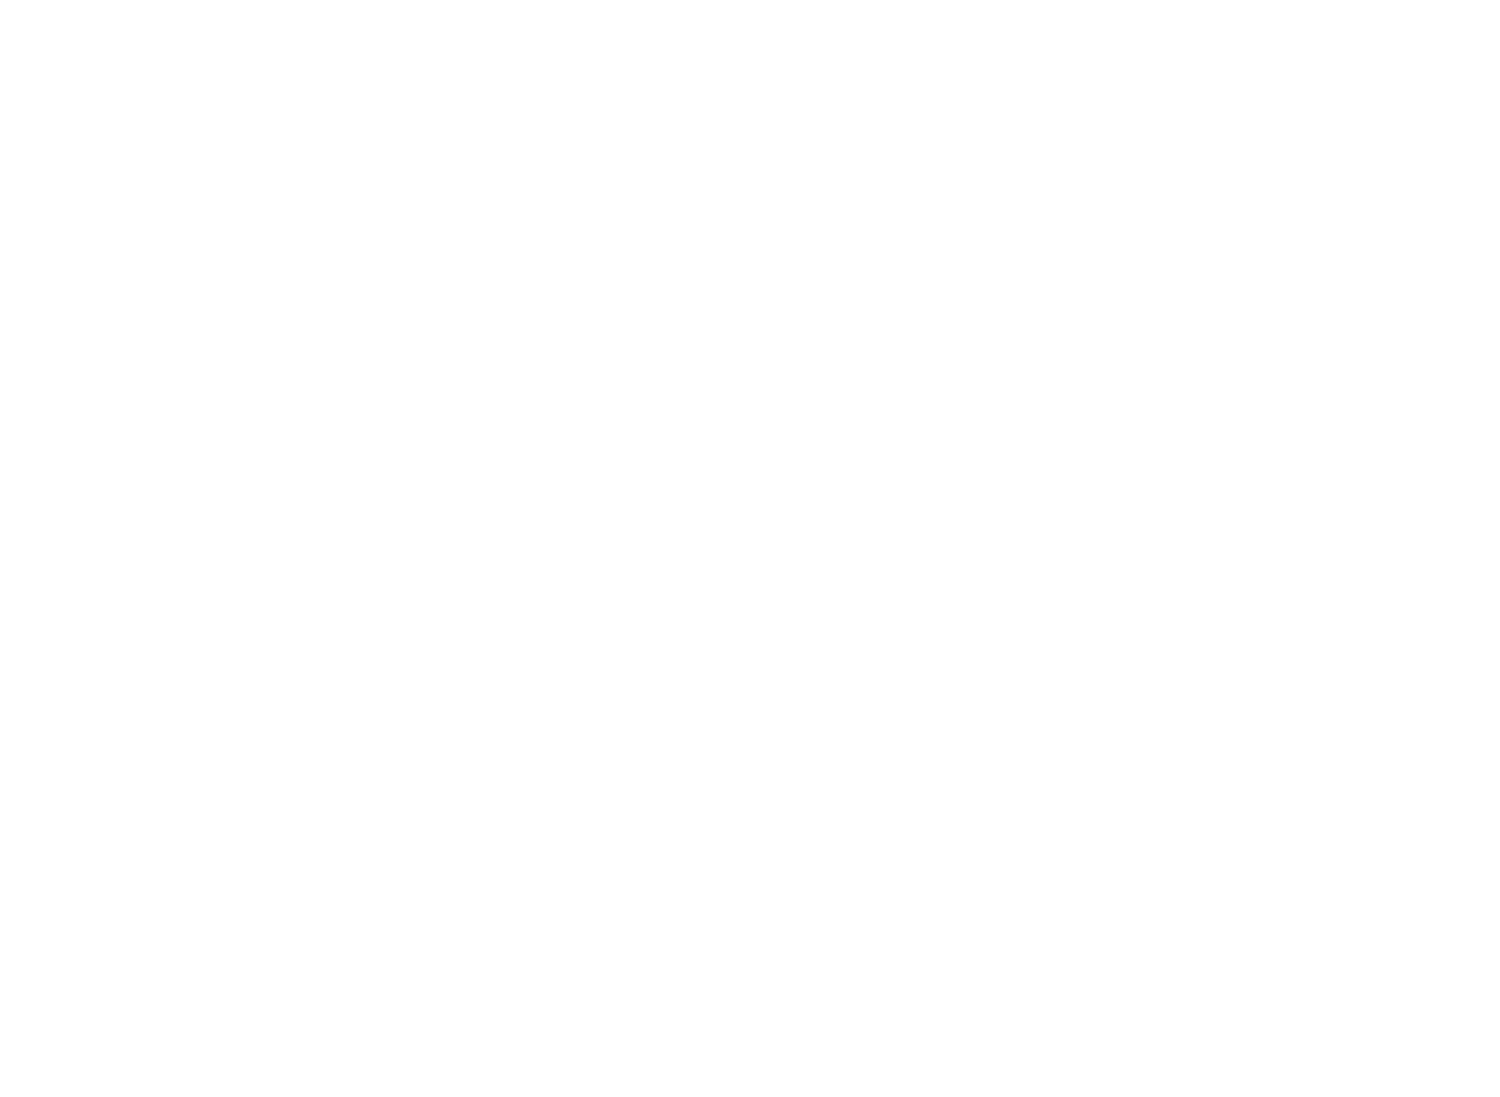 LOCAL CHOP & GRILL HOUSE